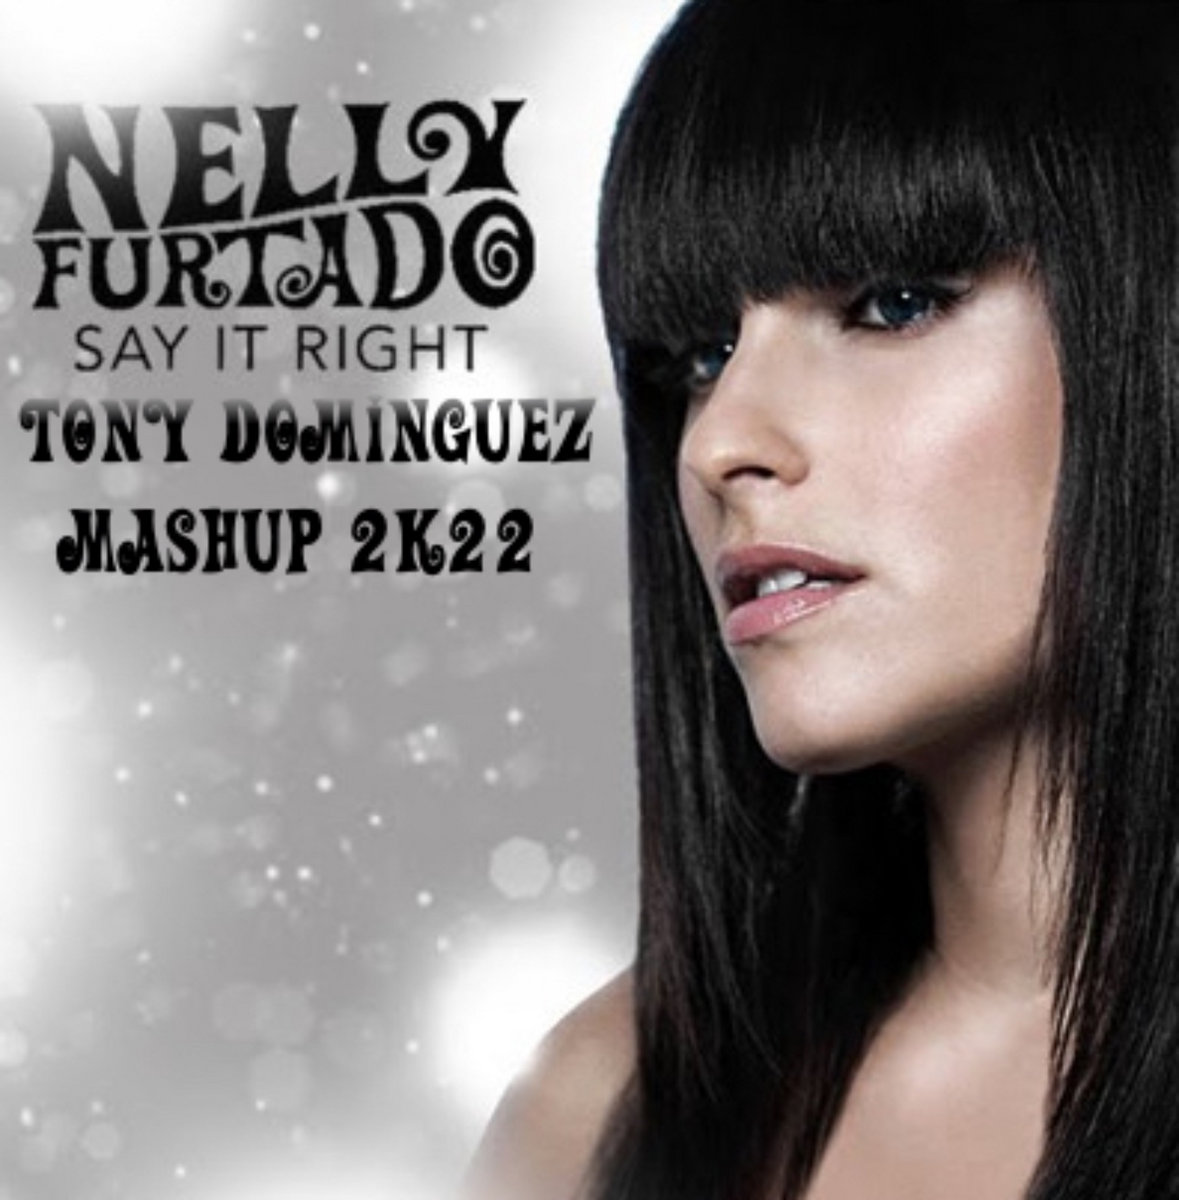 Say it discover. Nelly Furtado say it right 2006.